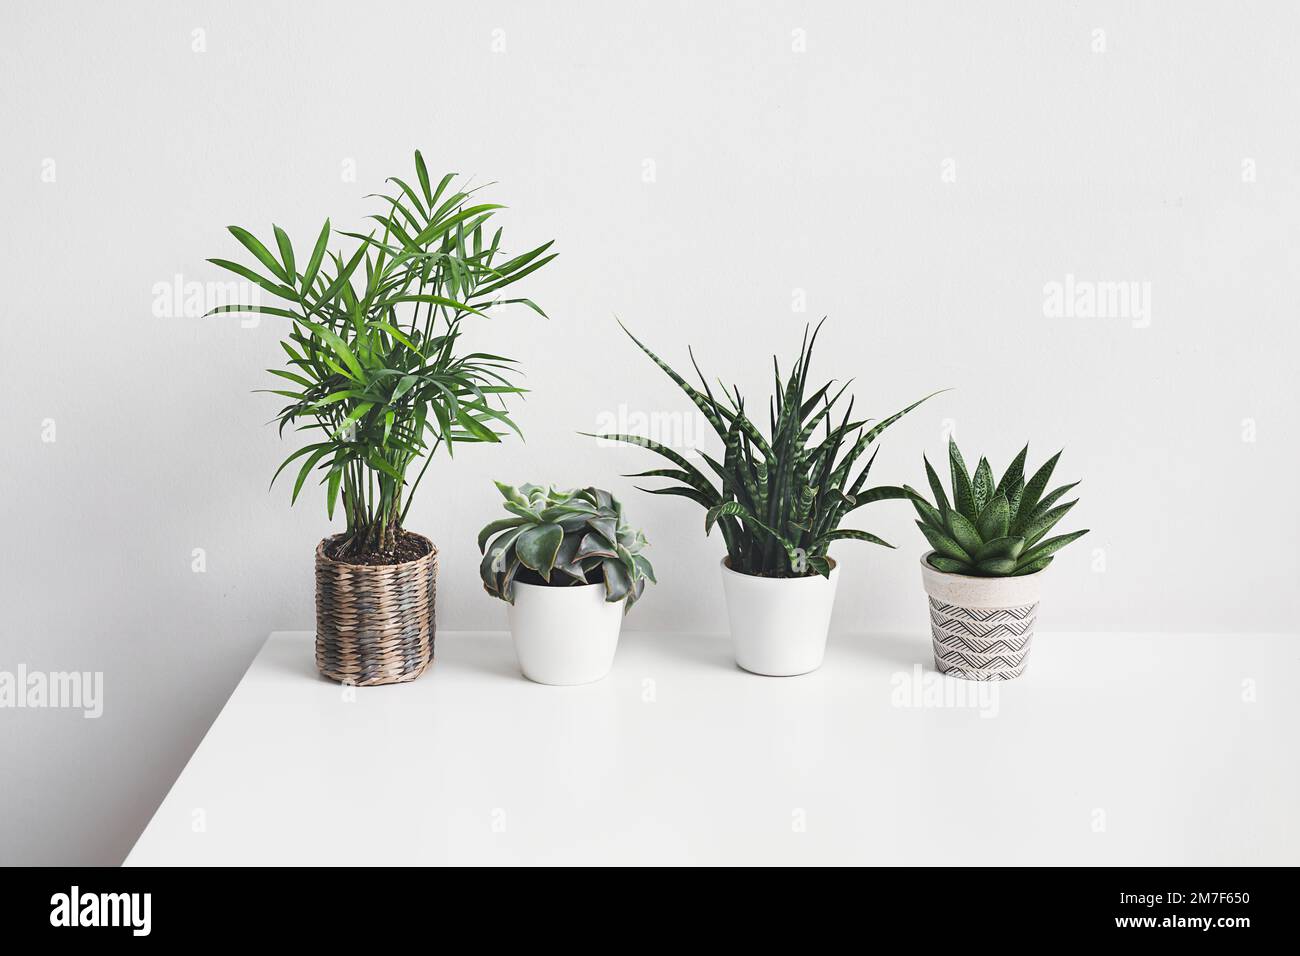 Several home plants - succulents on the white background, home gardening and connecting with nature concept Stock Photo